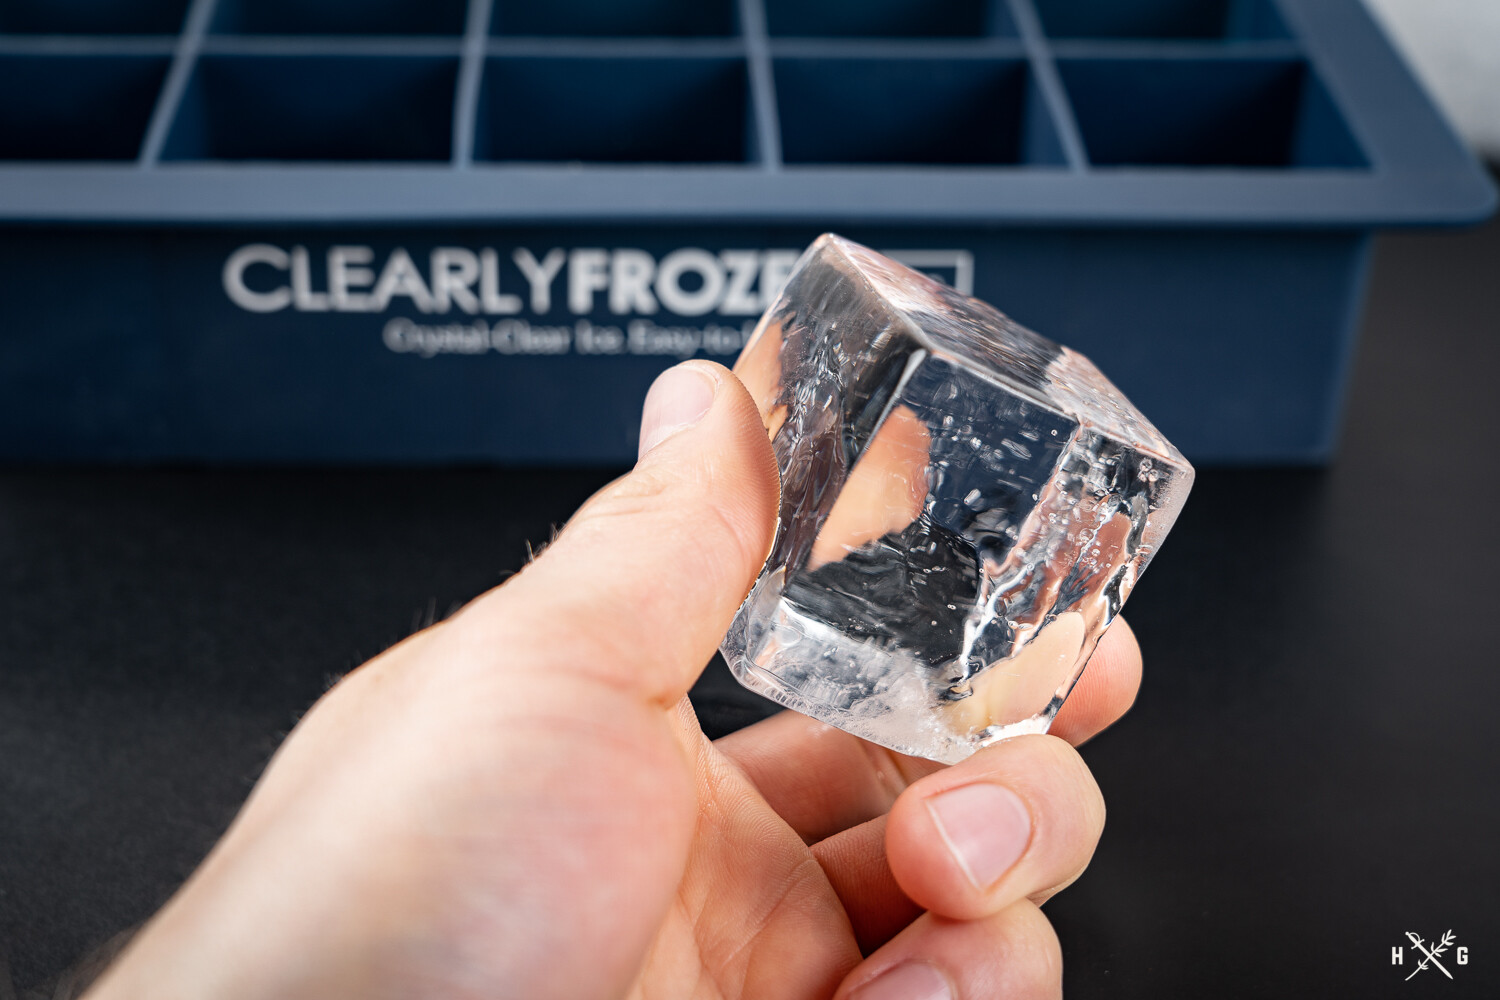 https://www.thehumblegarnish.com/wp-content/uploads/2020/01/Clearly-Frozen-Clear-Ice-Mold-sample-03.jpg